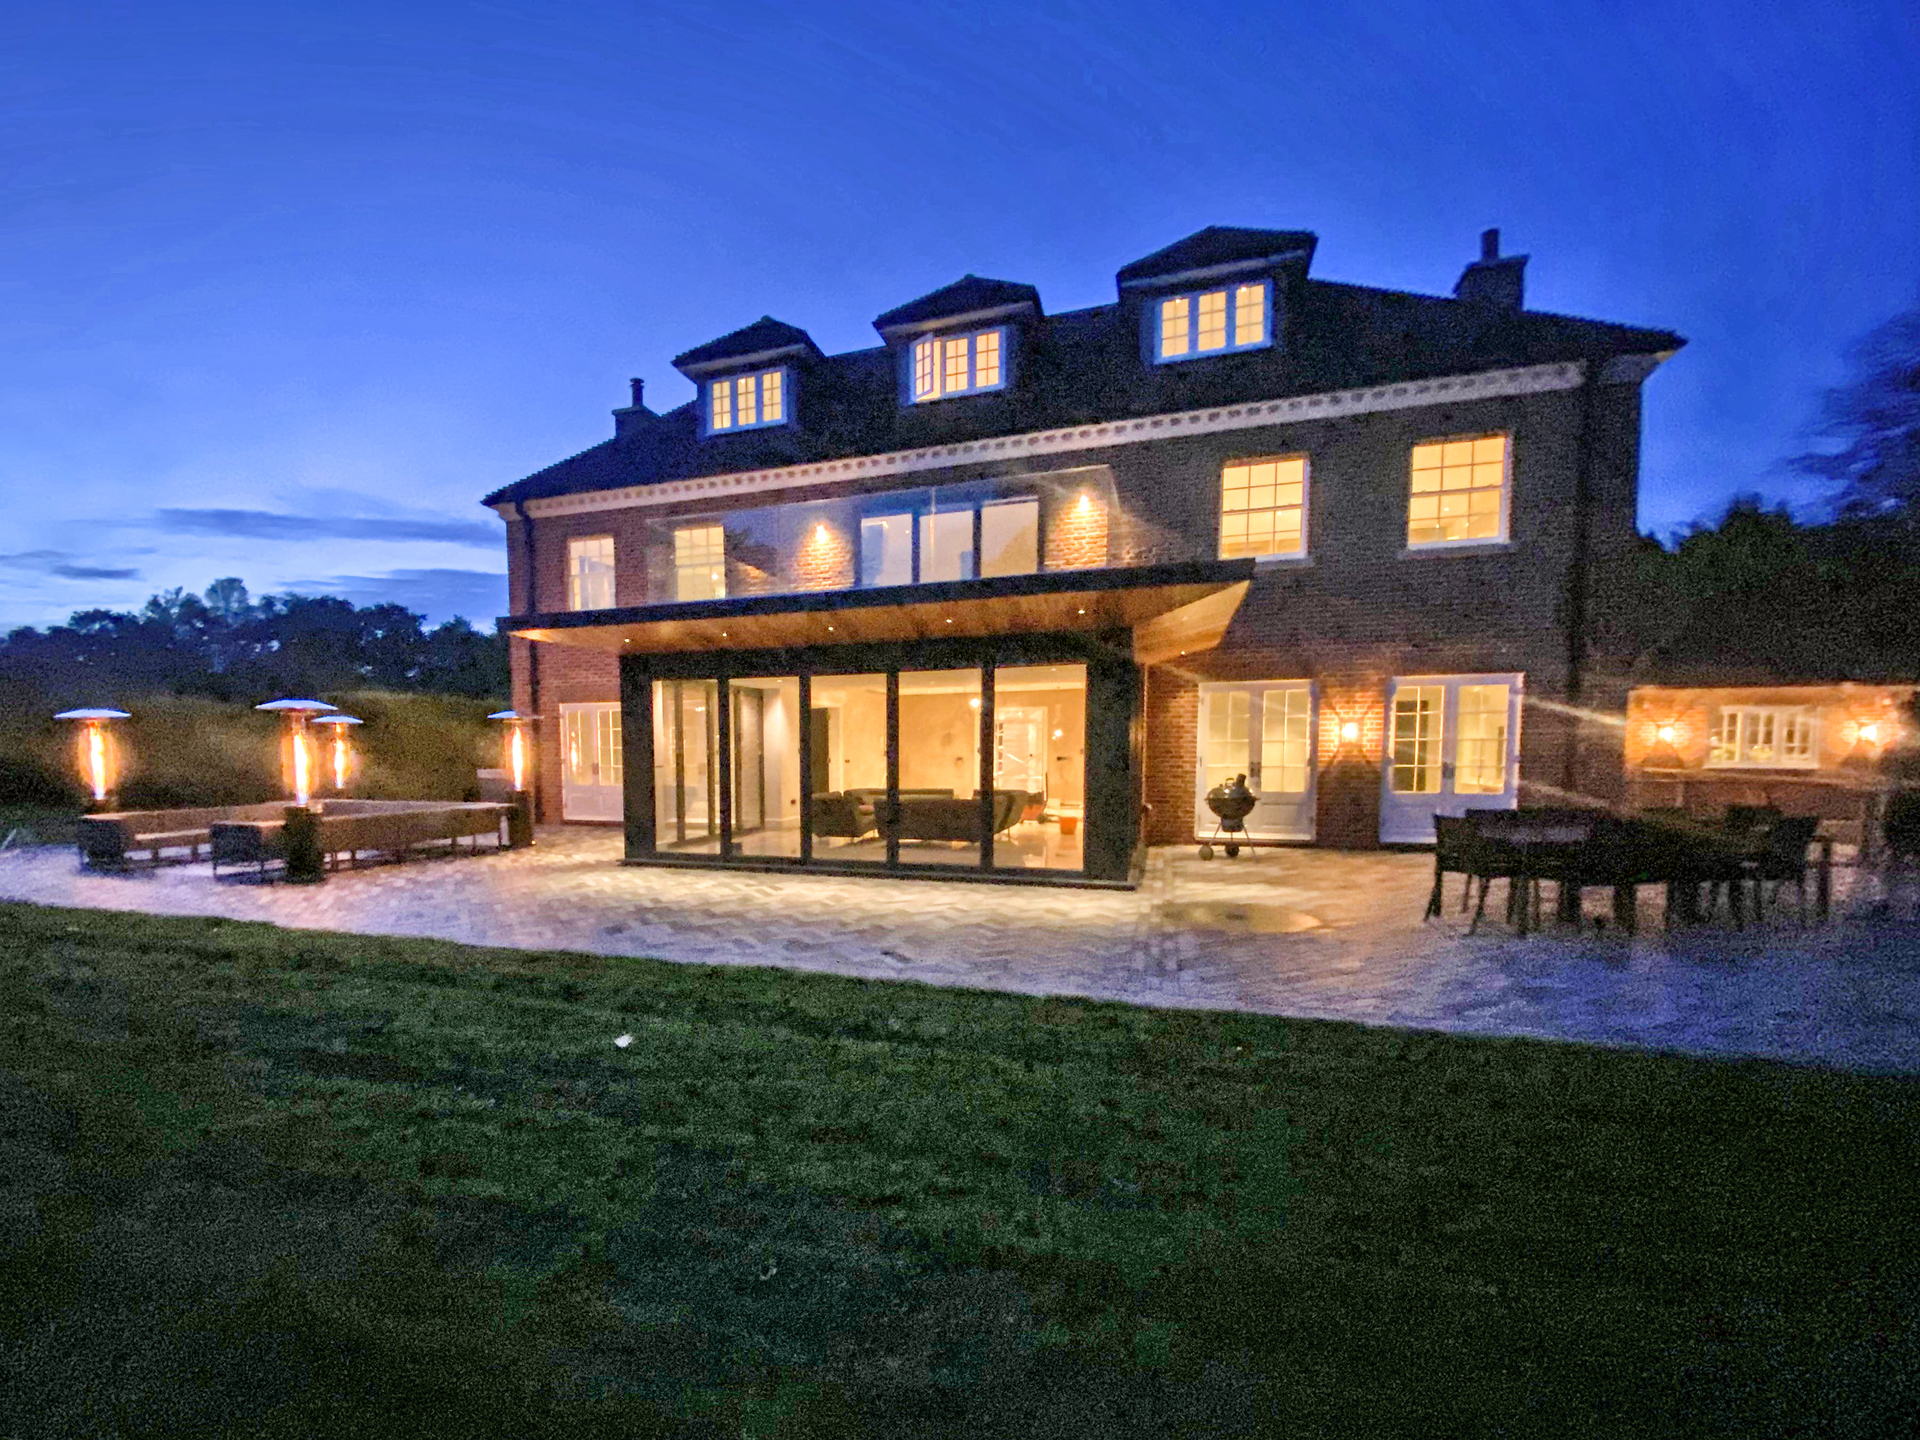 Rear view of luxury property at dusk with lights on